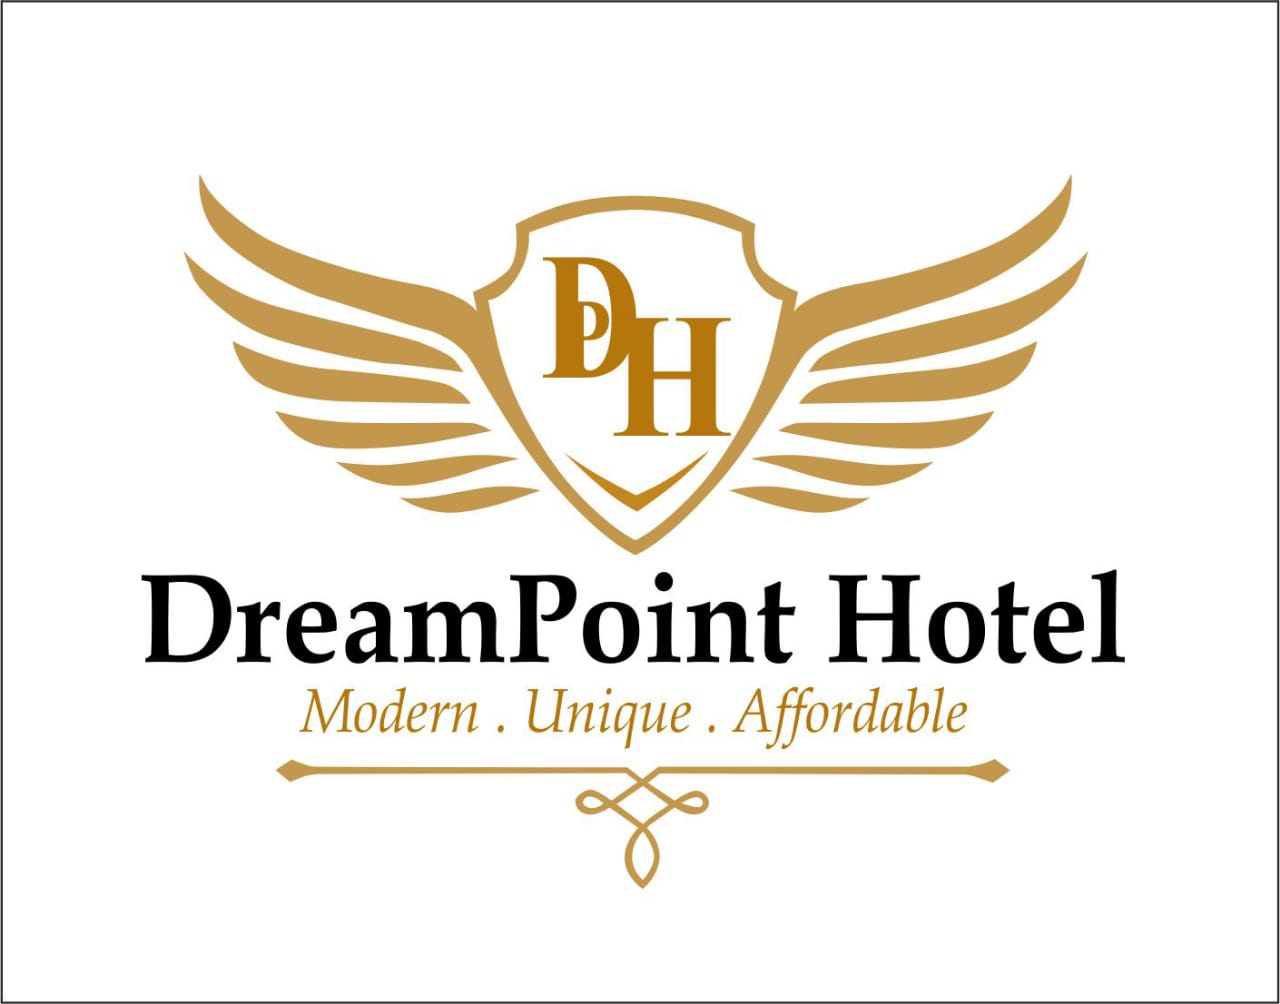 Dreampoint Hotel